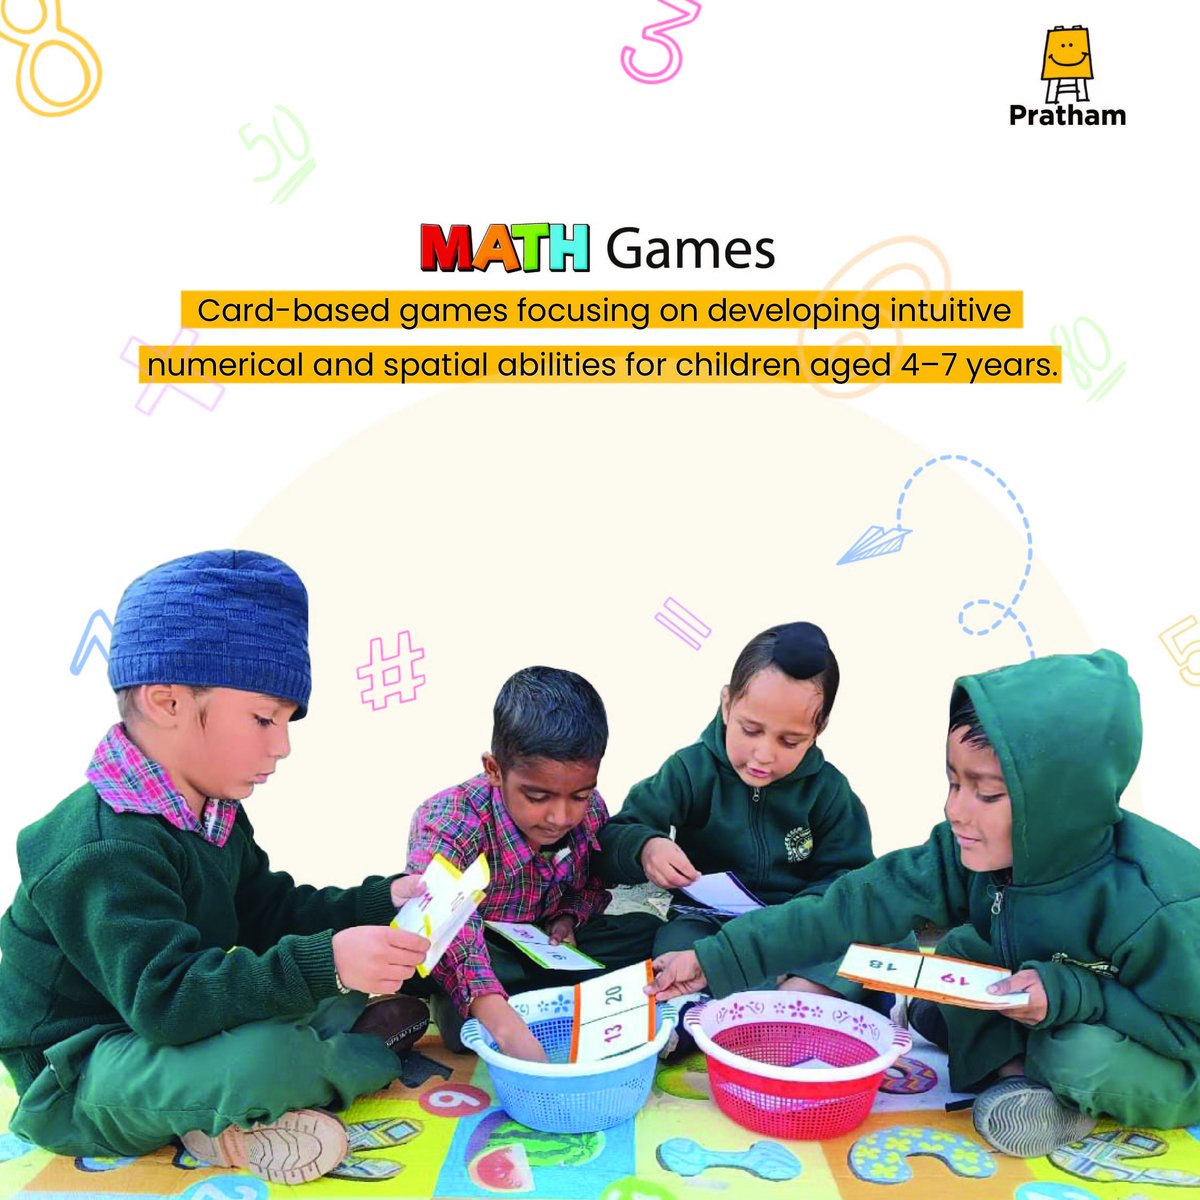 With an aim to make Math learning fun for children and dispel their phobia towards it, Pratham, in partnership with JPAL South Asia, has piloted an innovative game-based Mathematics curriculum in Punjab, Himachal Pradesh, and Delhi. #pratham #ngo #learning # math